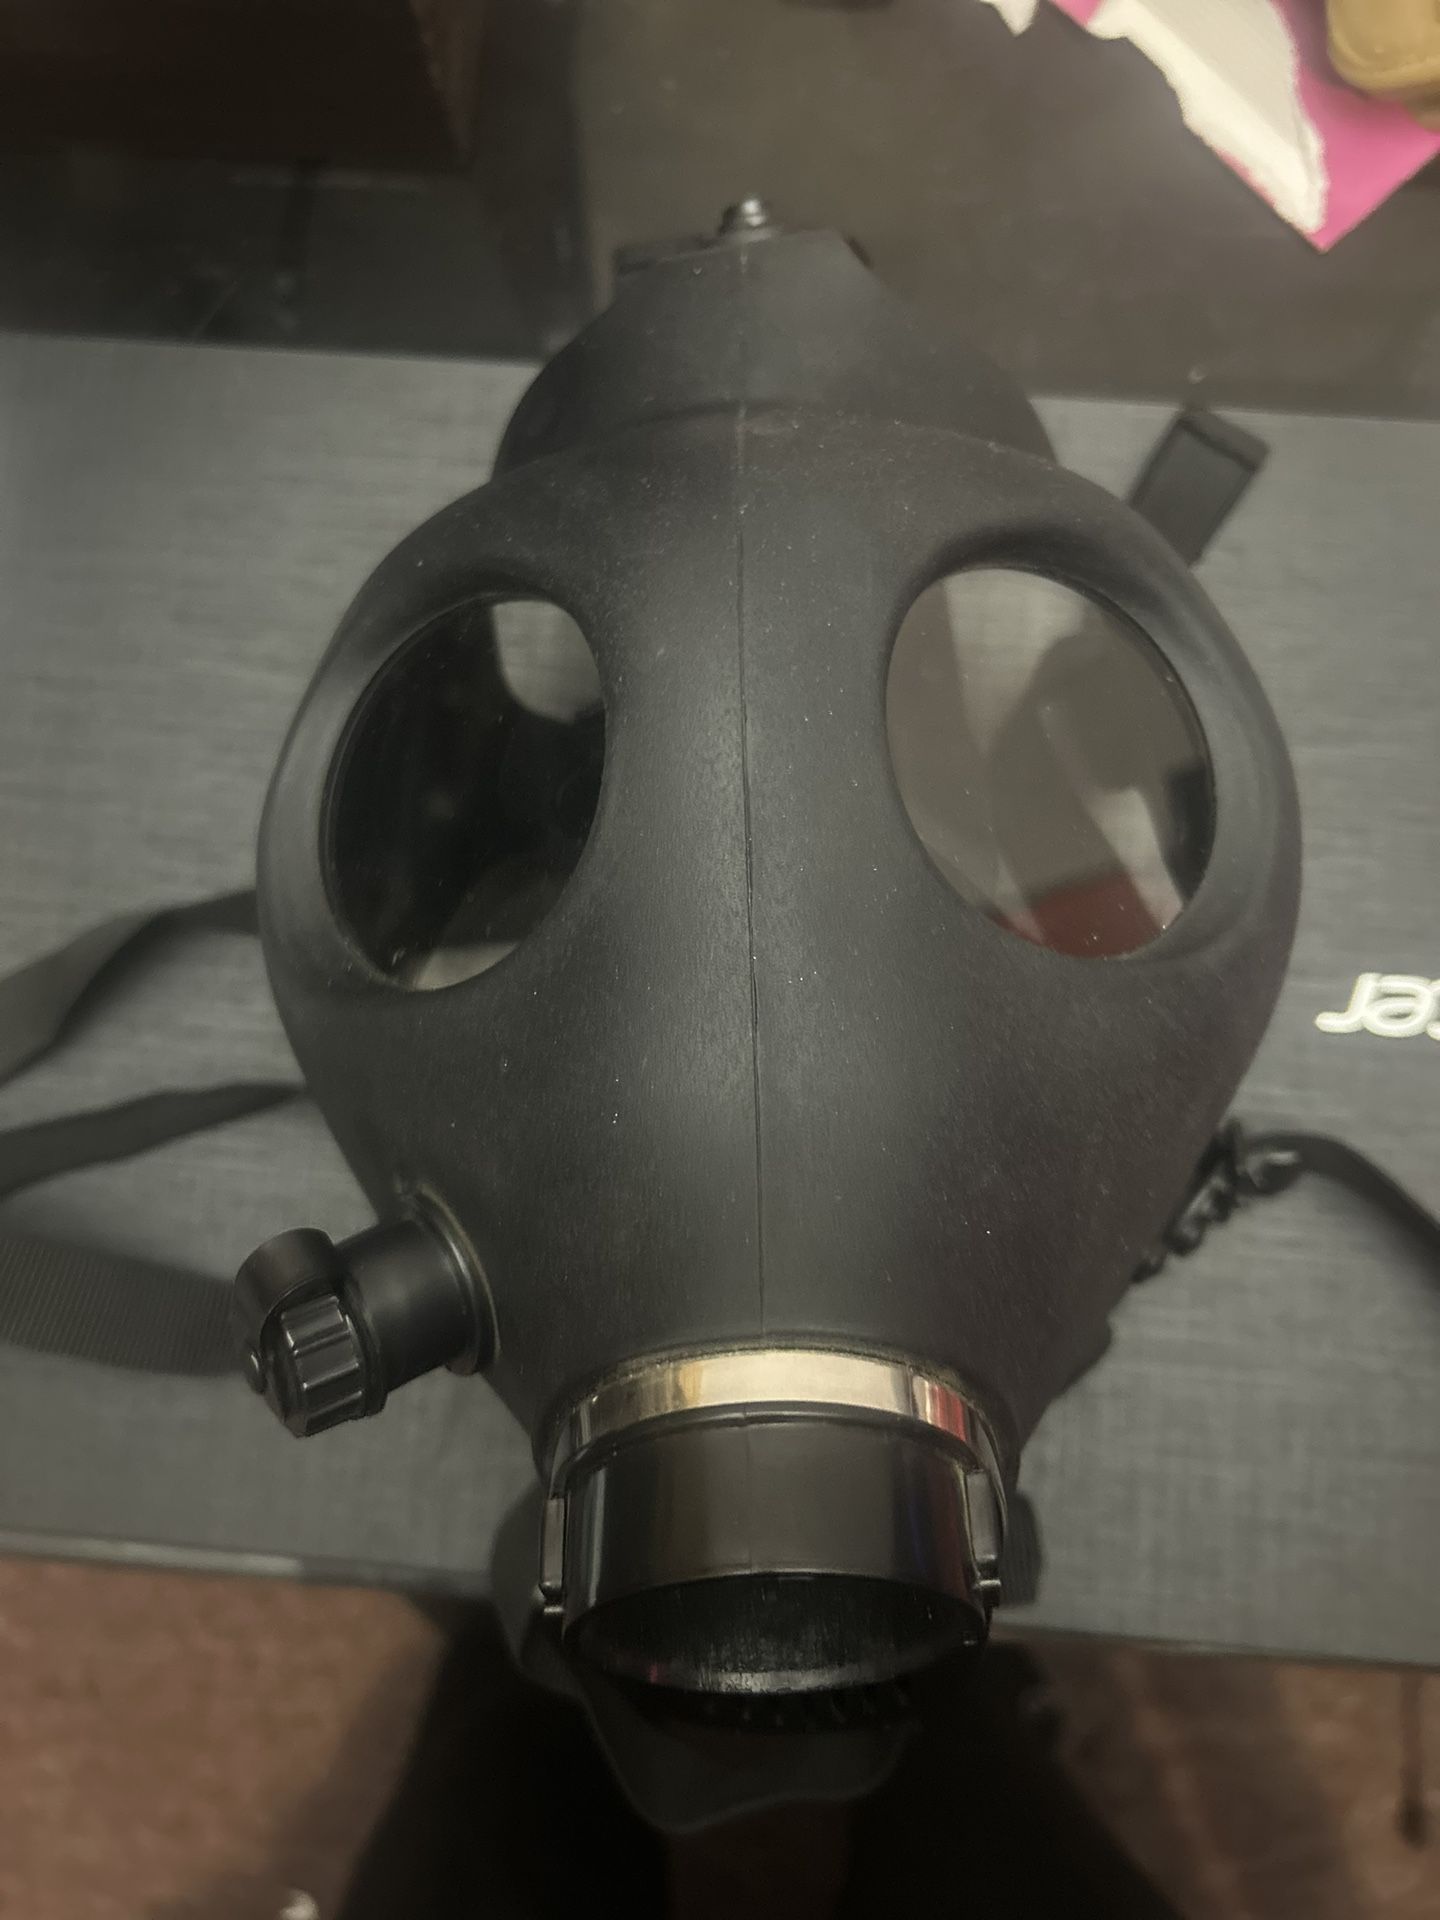 Gas mask with adjustable straps. 